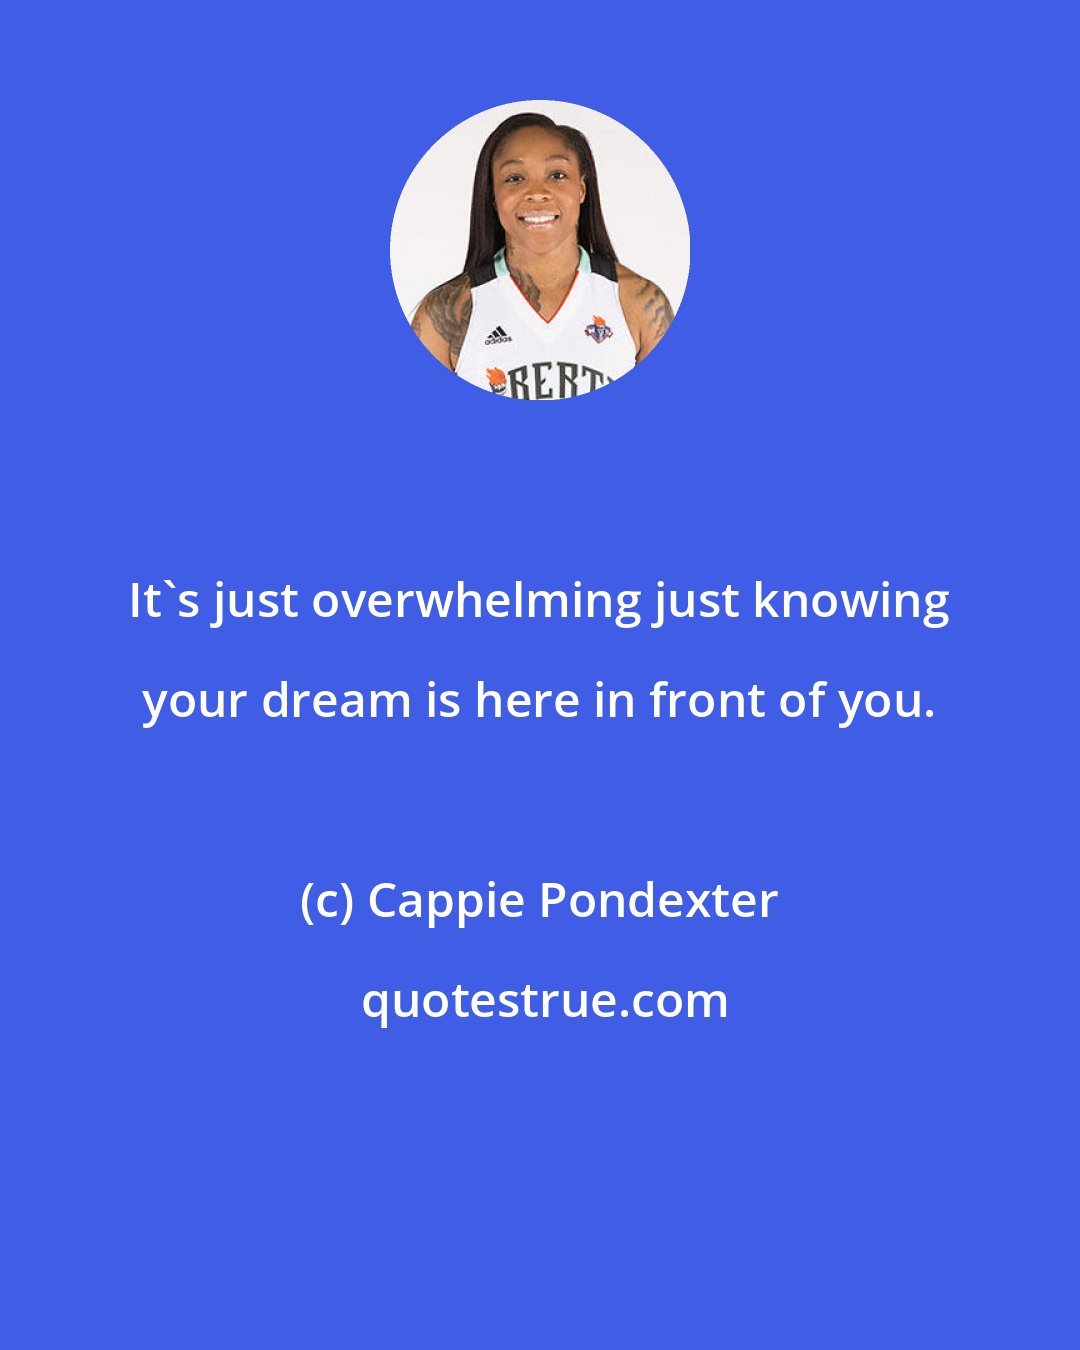 Cappie Pondexter: It's just overwhelming just knowing your dream is here in front of you.